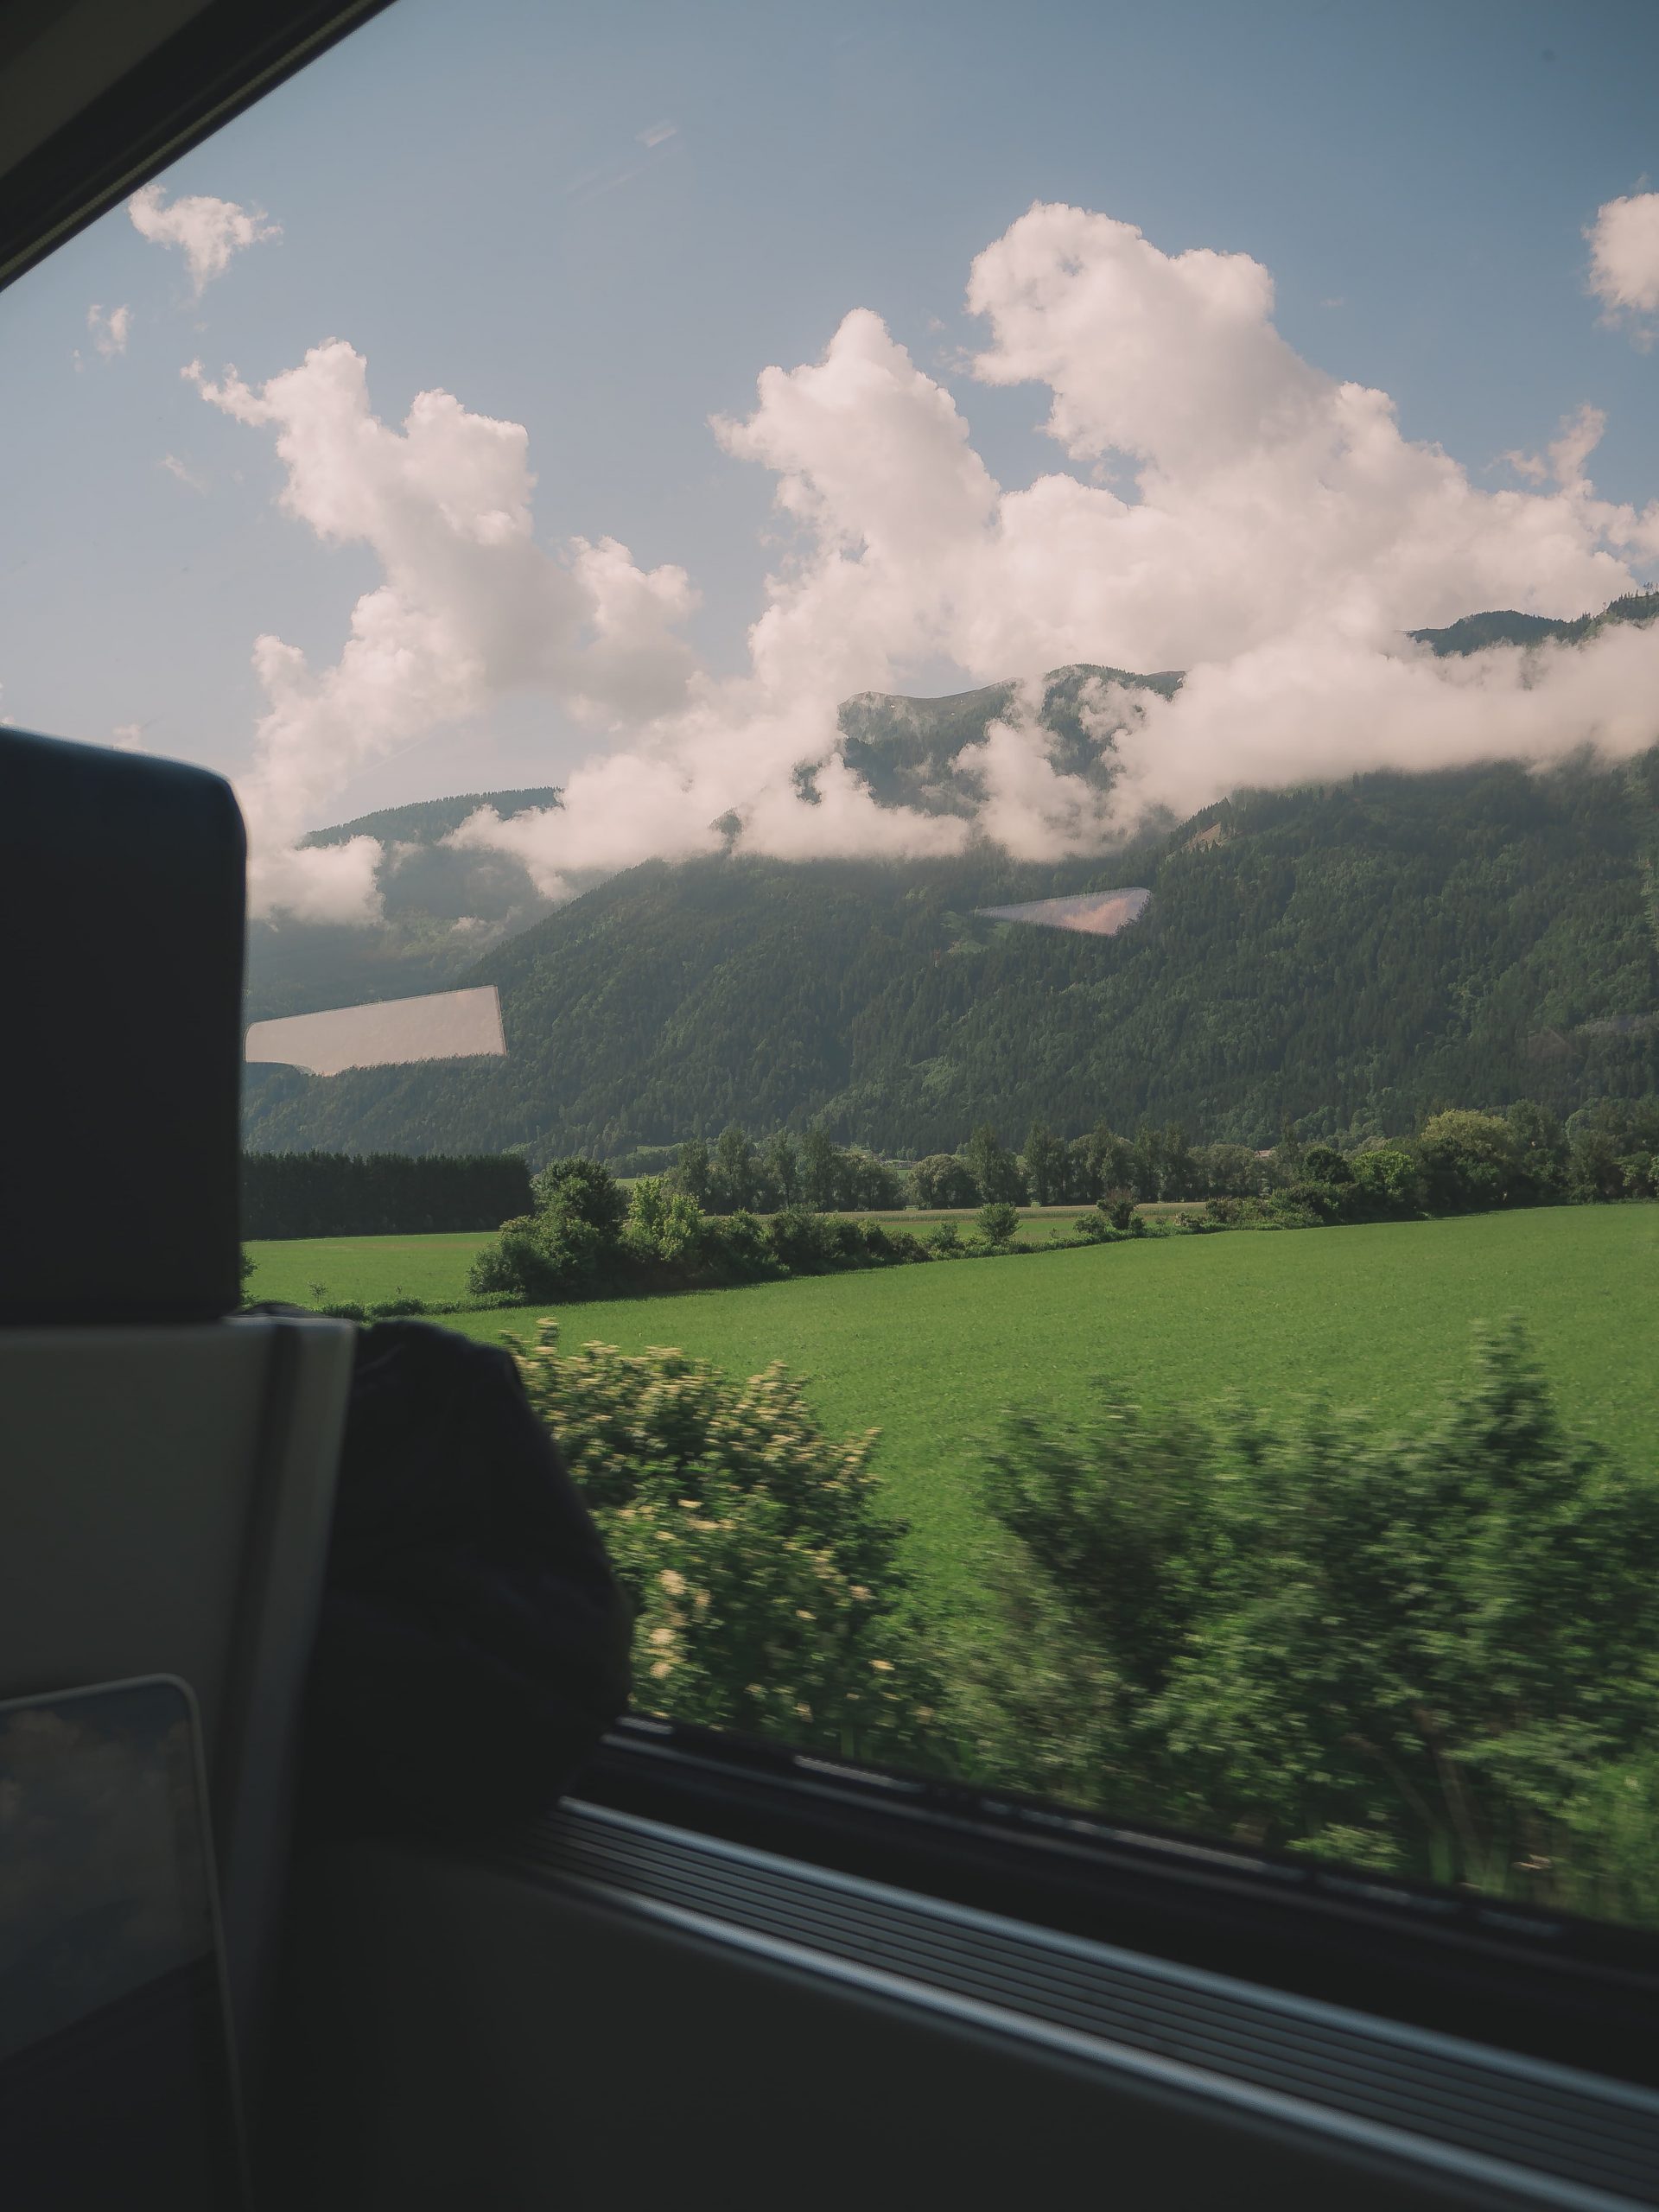 Austria train window view for guest post on Brads Backpack on european train travel by Lizet from A Wanderfood Life